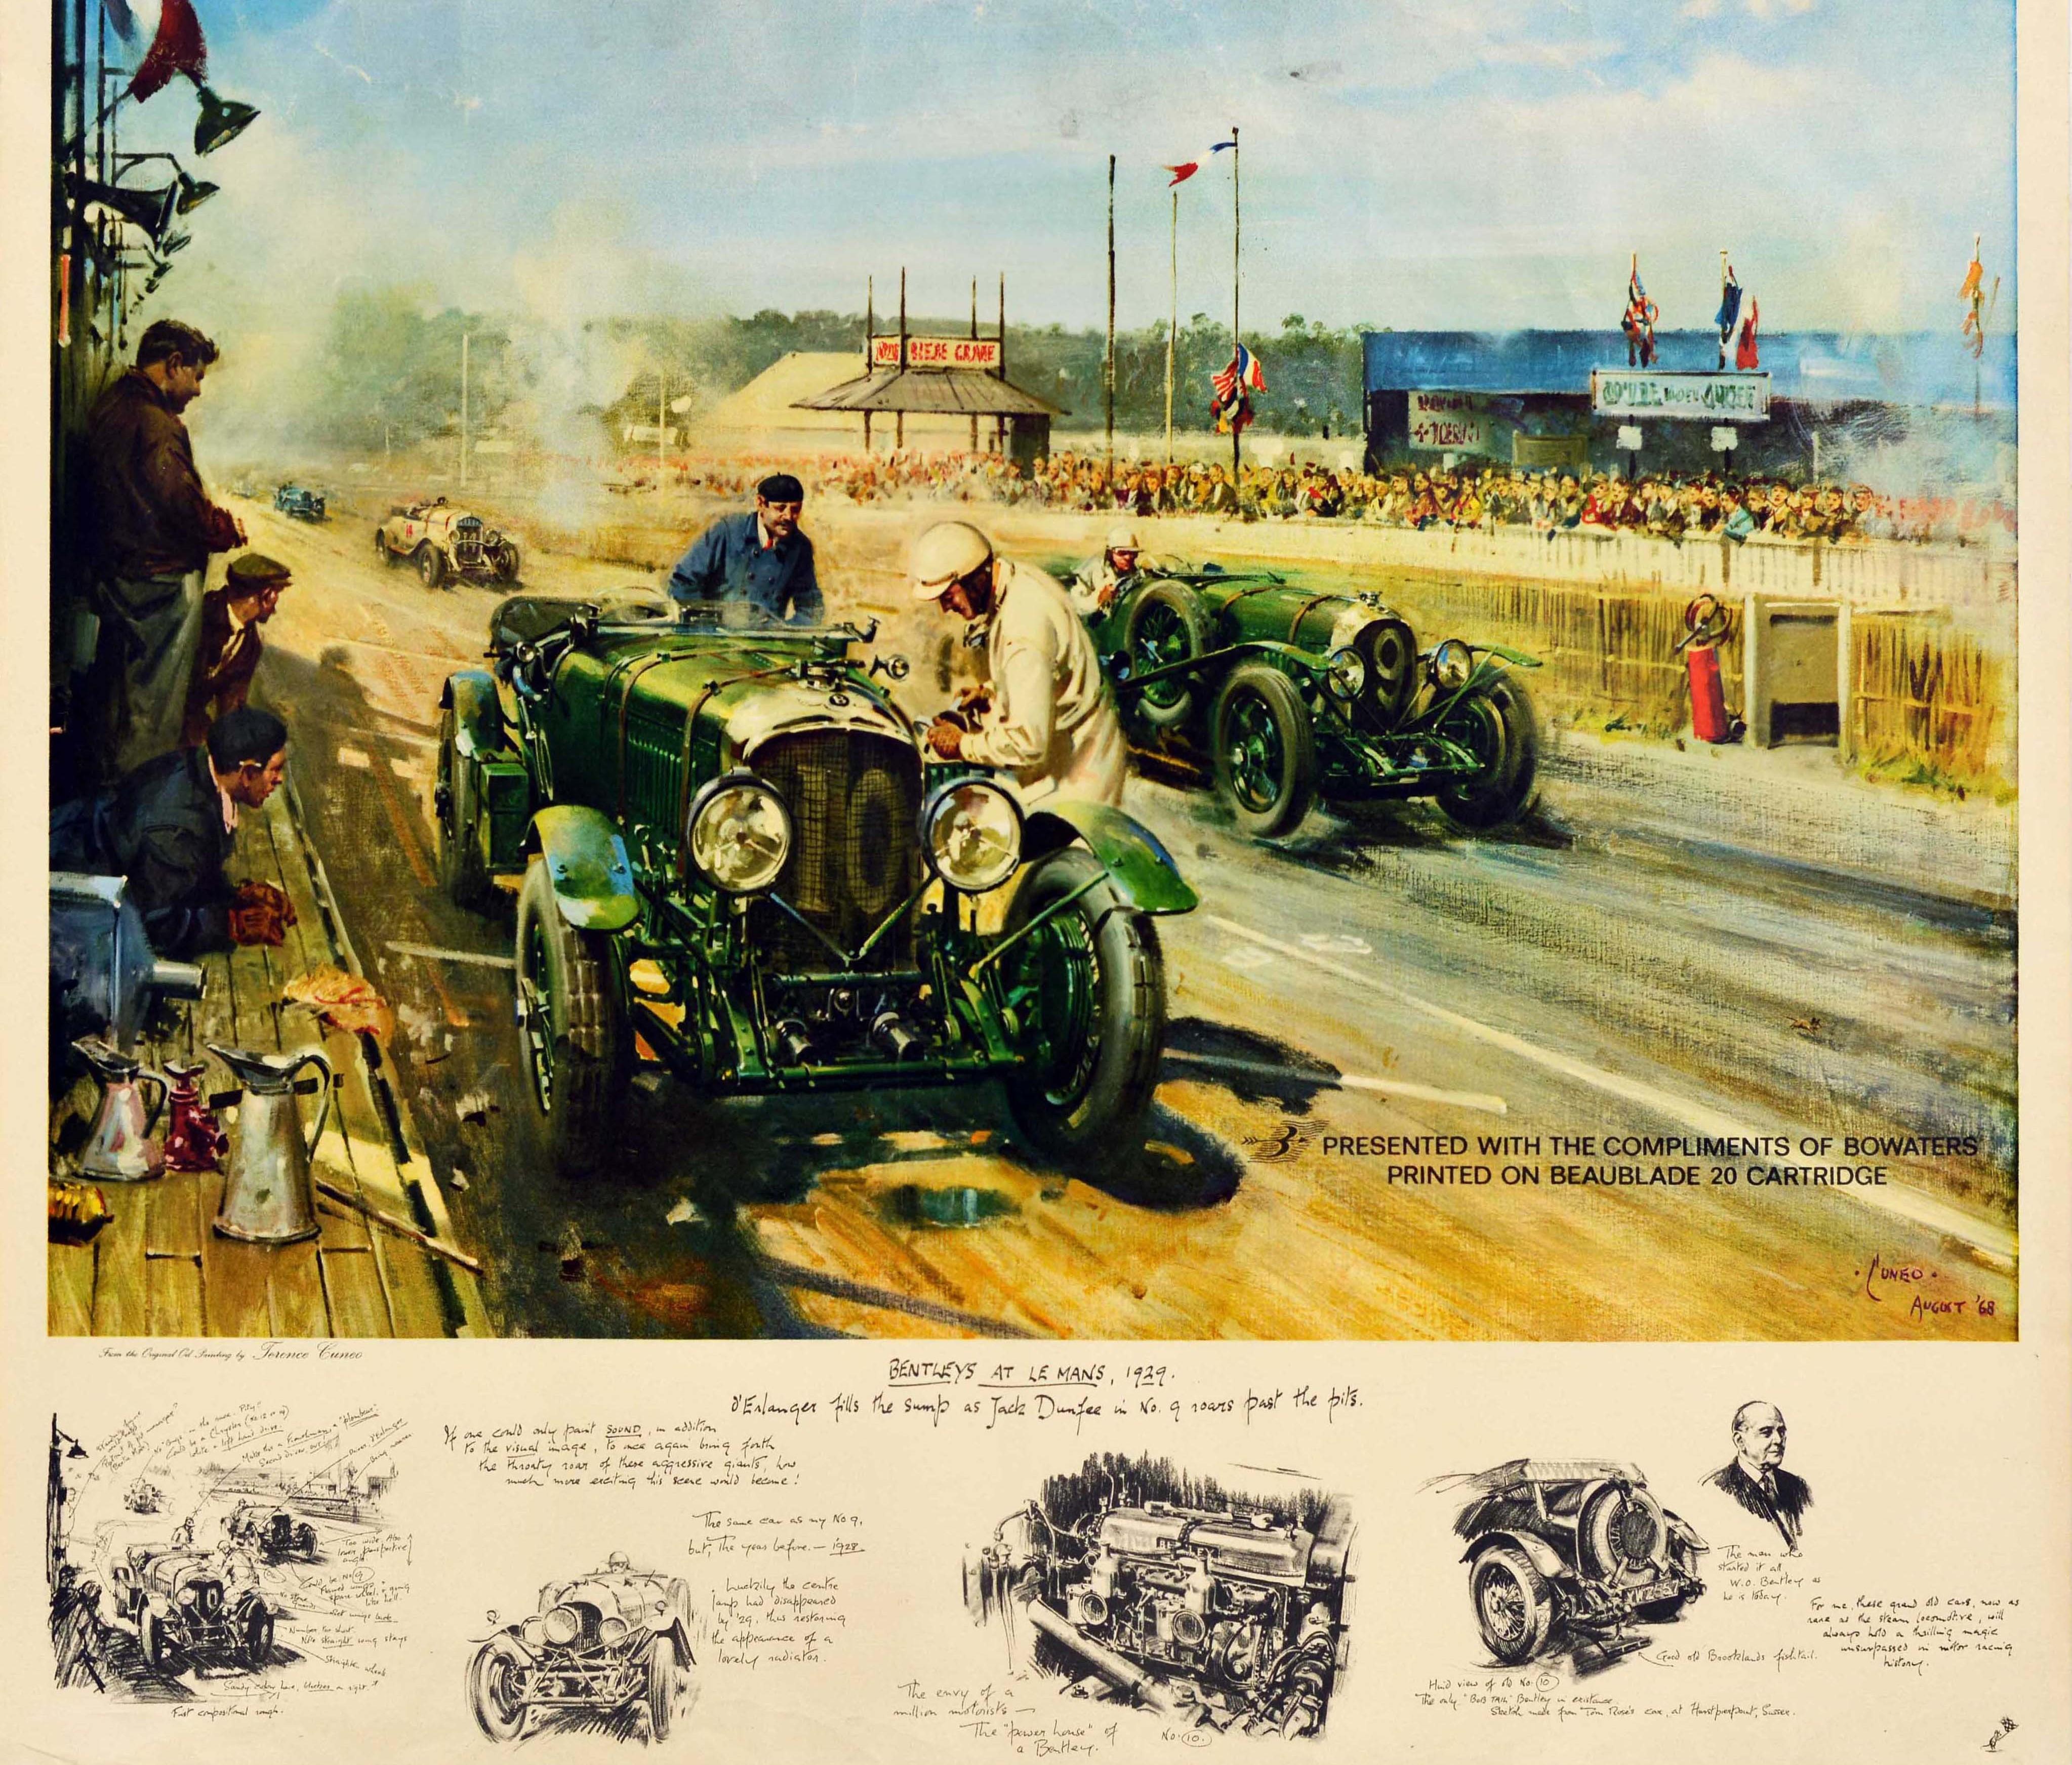 Original vintage motor sport poster titled Bentleys at Le Mans, 1929 celebrating the wins by the British car manufacturer Bentley Motors at the 24 Heures du Mans endurance car race in June 1929. Dynamic painting by the notable British artist Terence